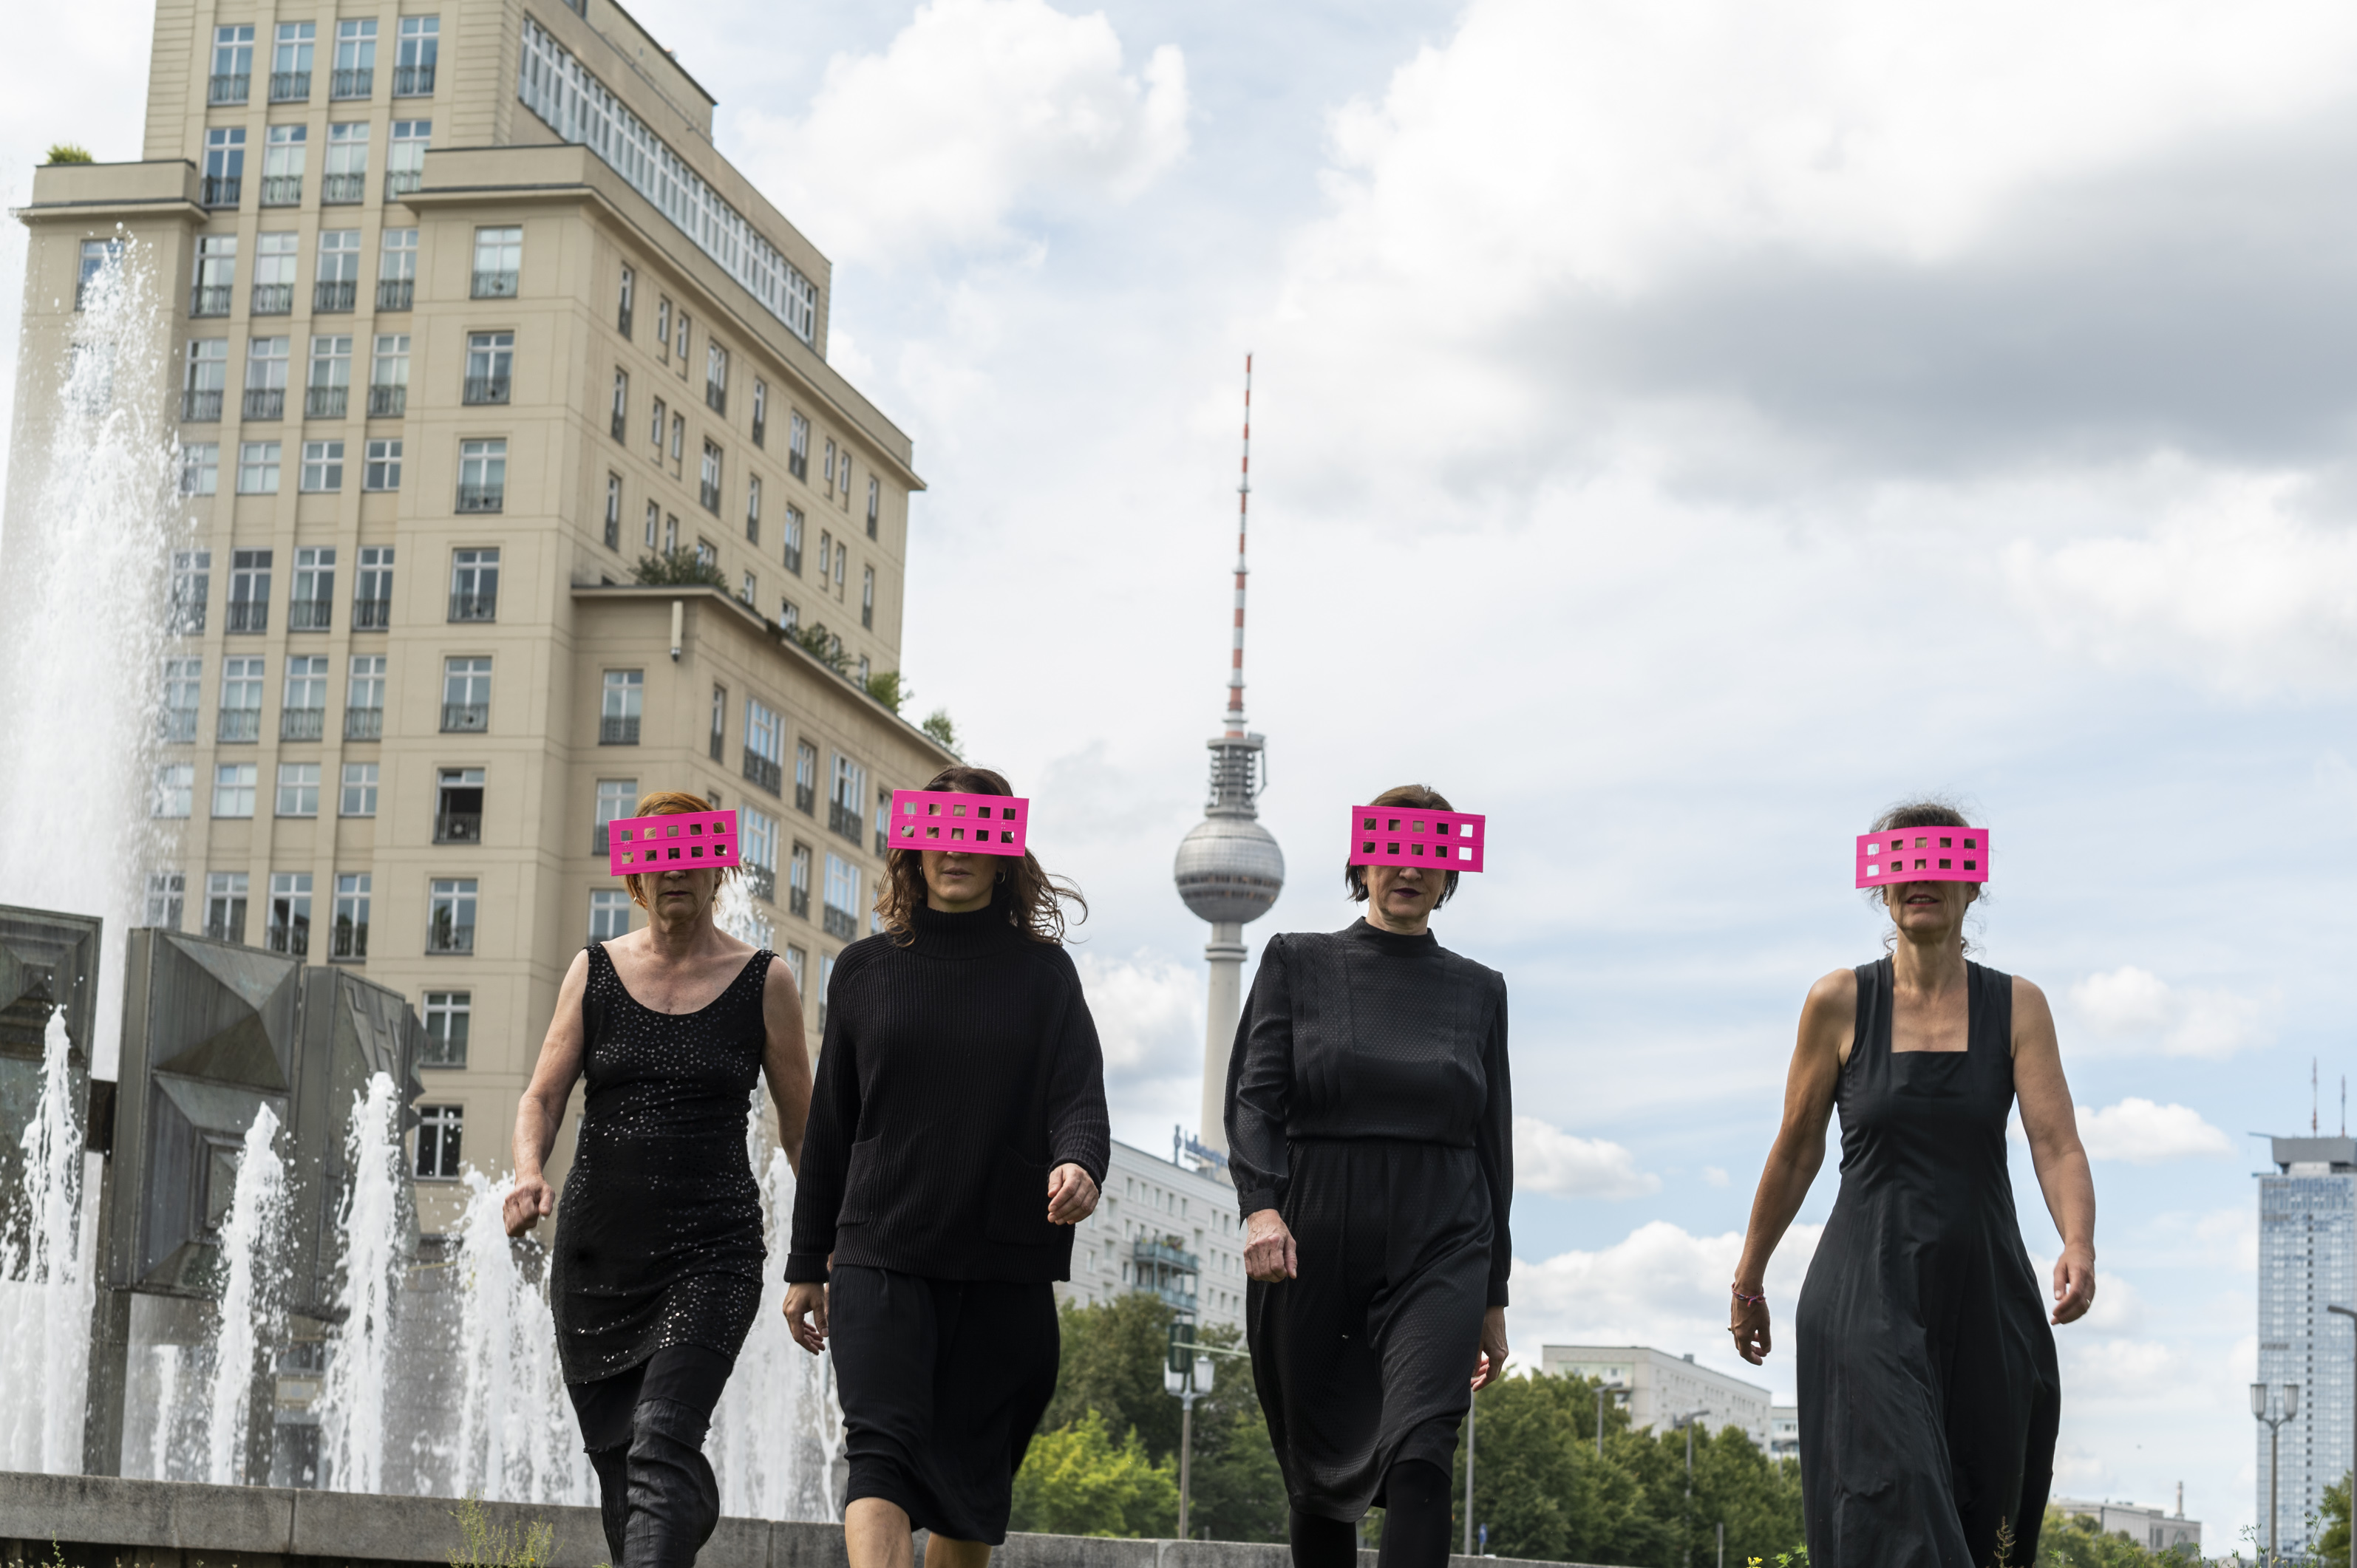 Four women walk through Berlin. They are dressed in black. They wear pink bars in front of their eyes, which are perforated.